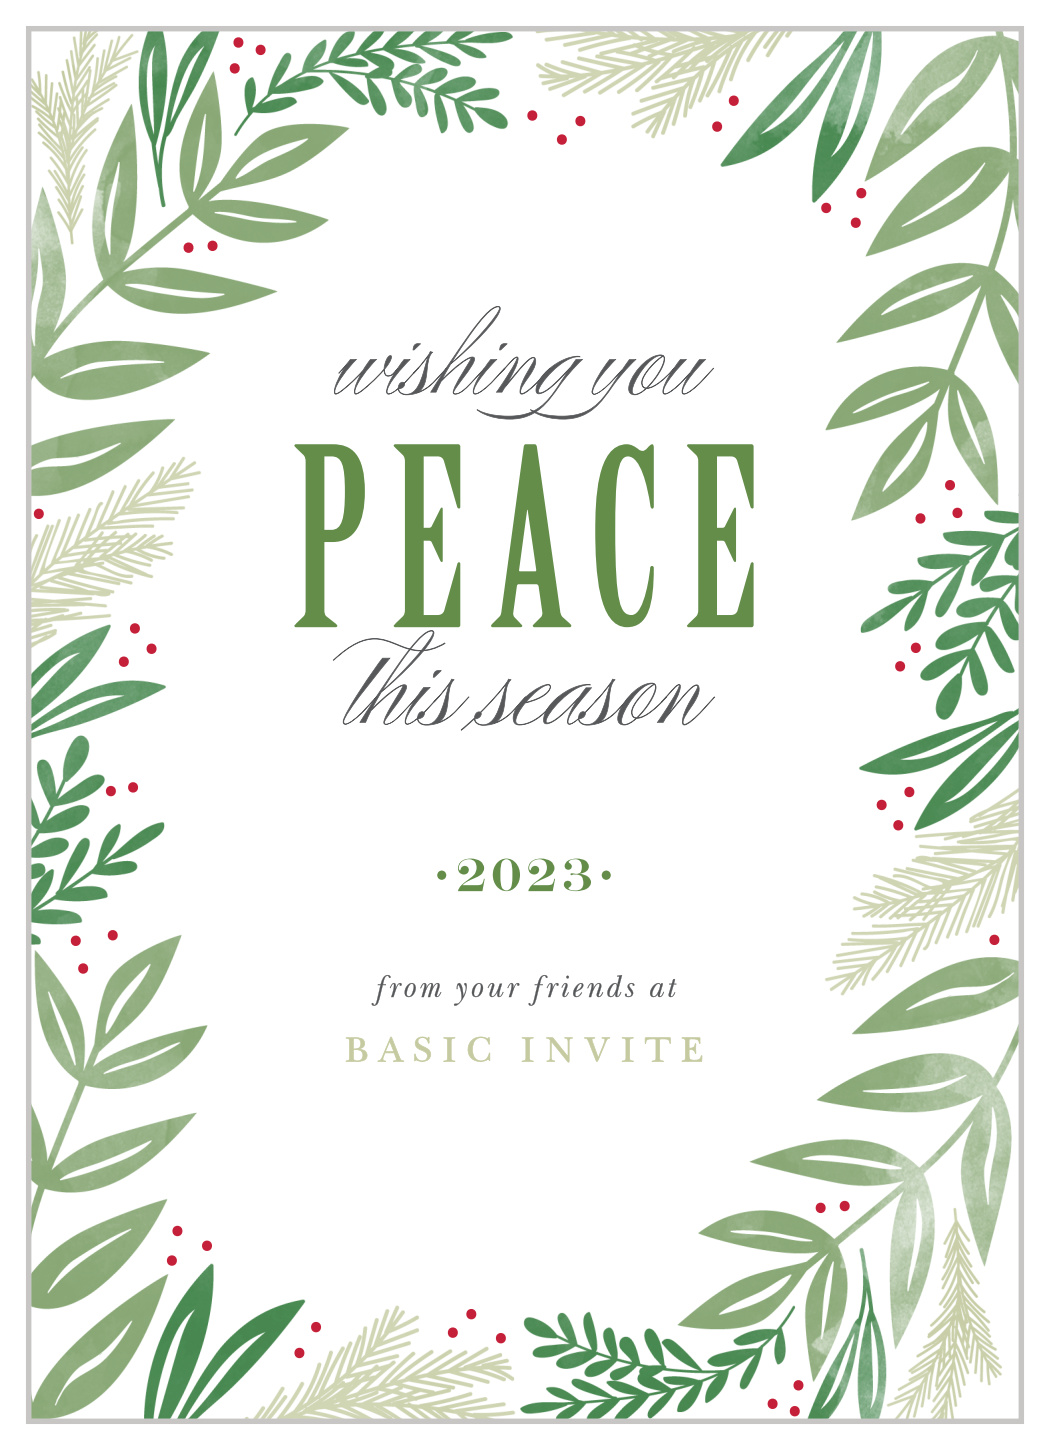 Woodland Wreath Corporate Holiday Cards